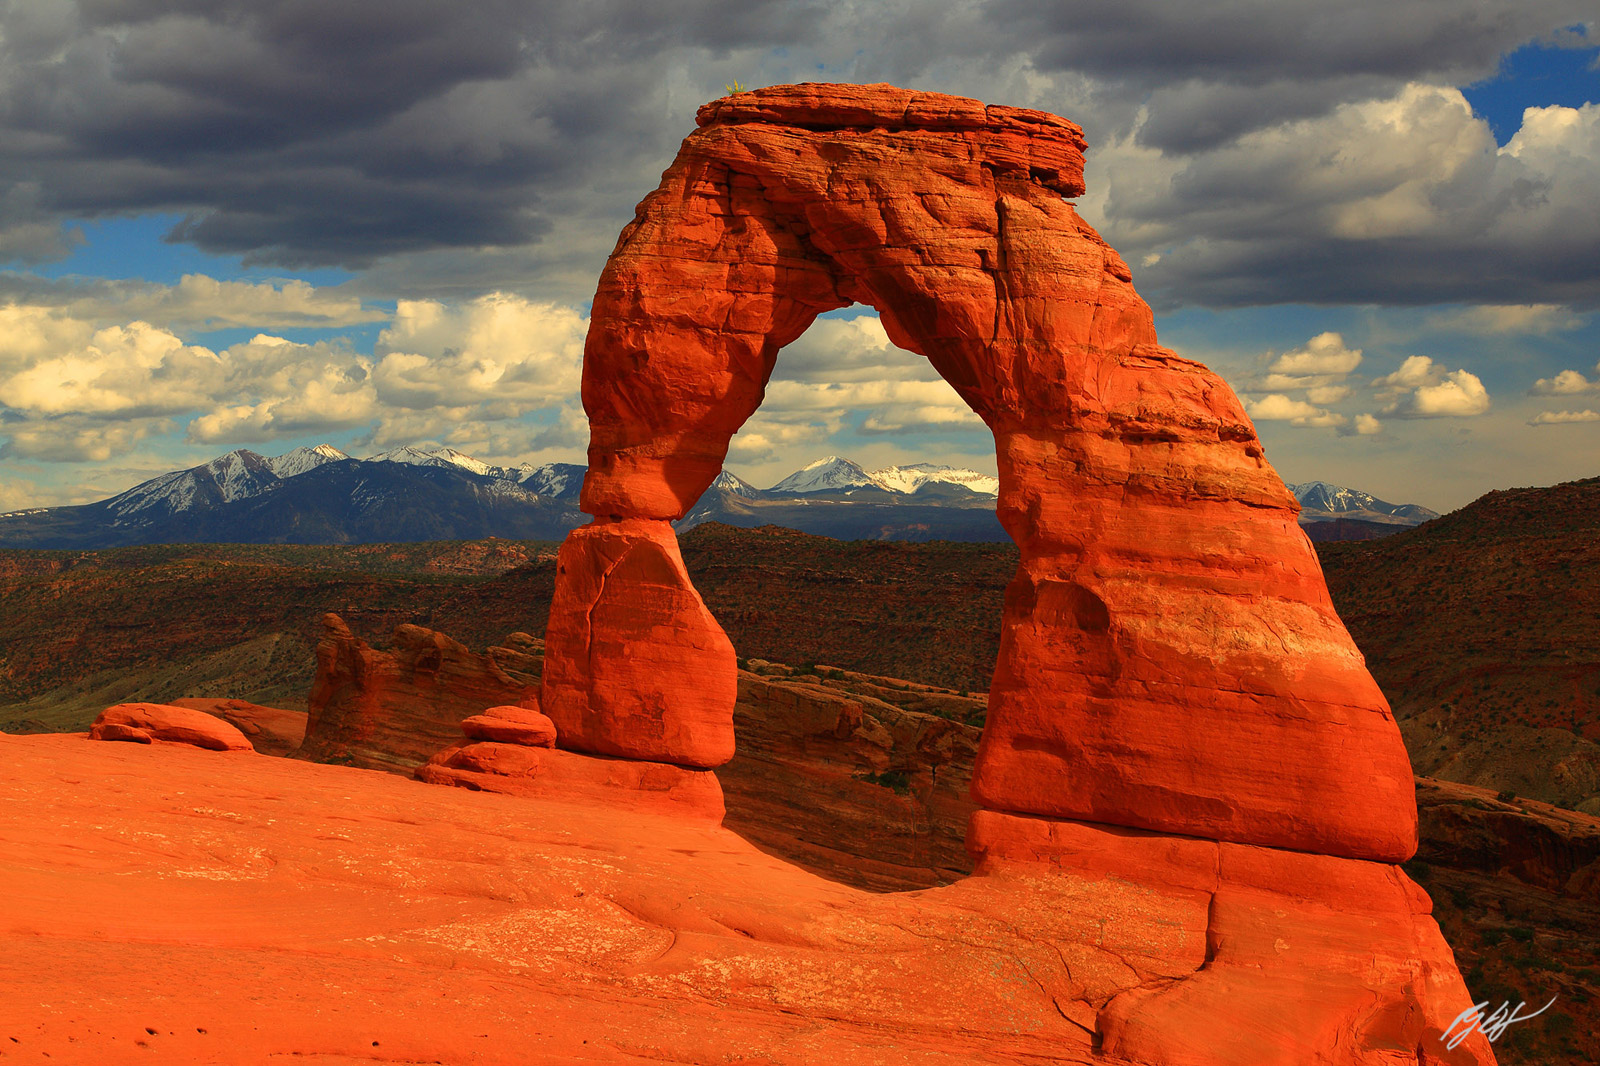 The Delicate Arch in Arches National Park in Utah